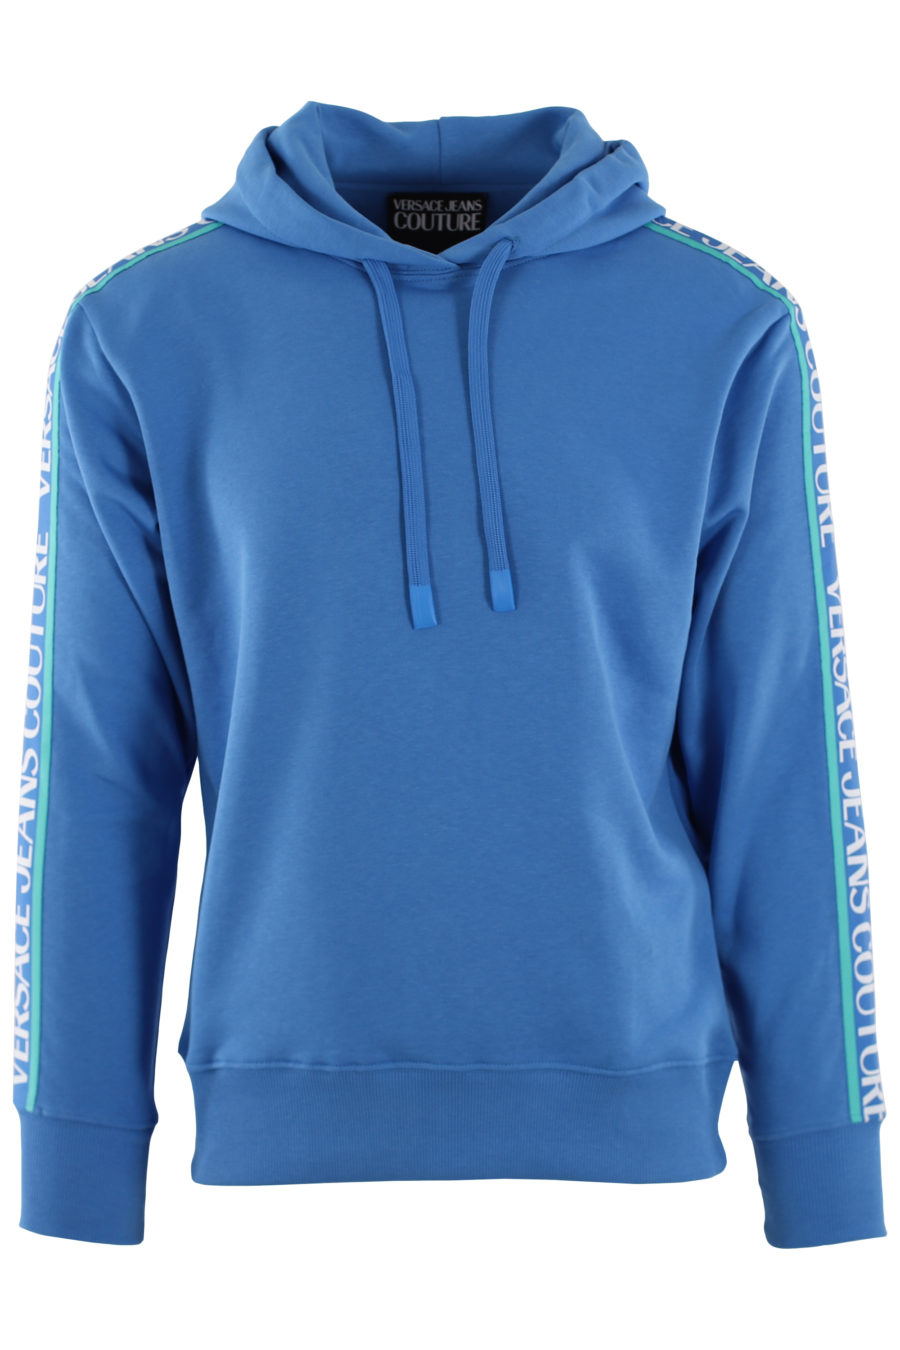 Blue sweatshirt with hood and blue ribbon with logo - IMG 0448